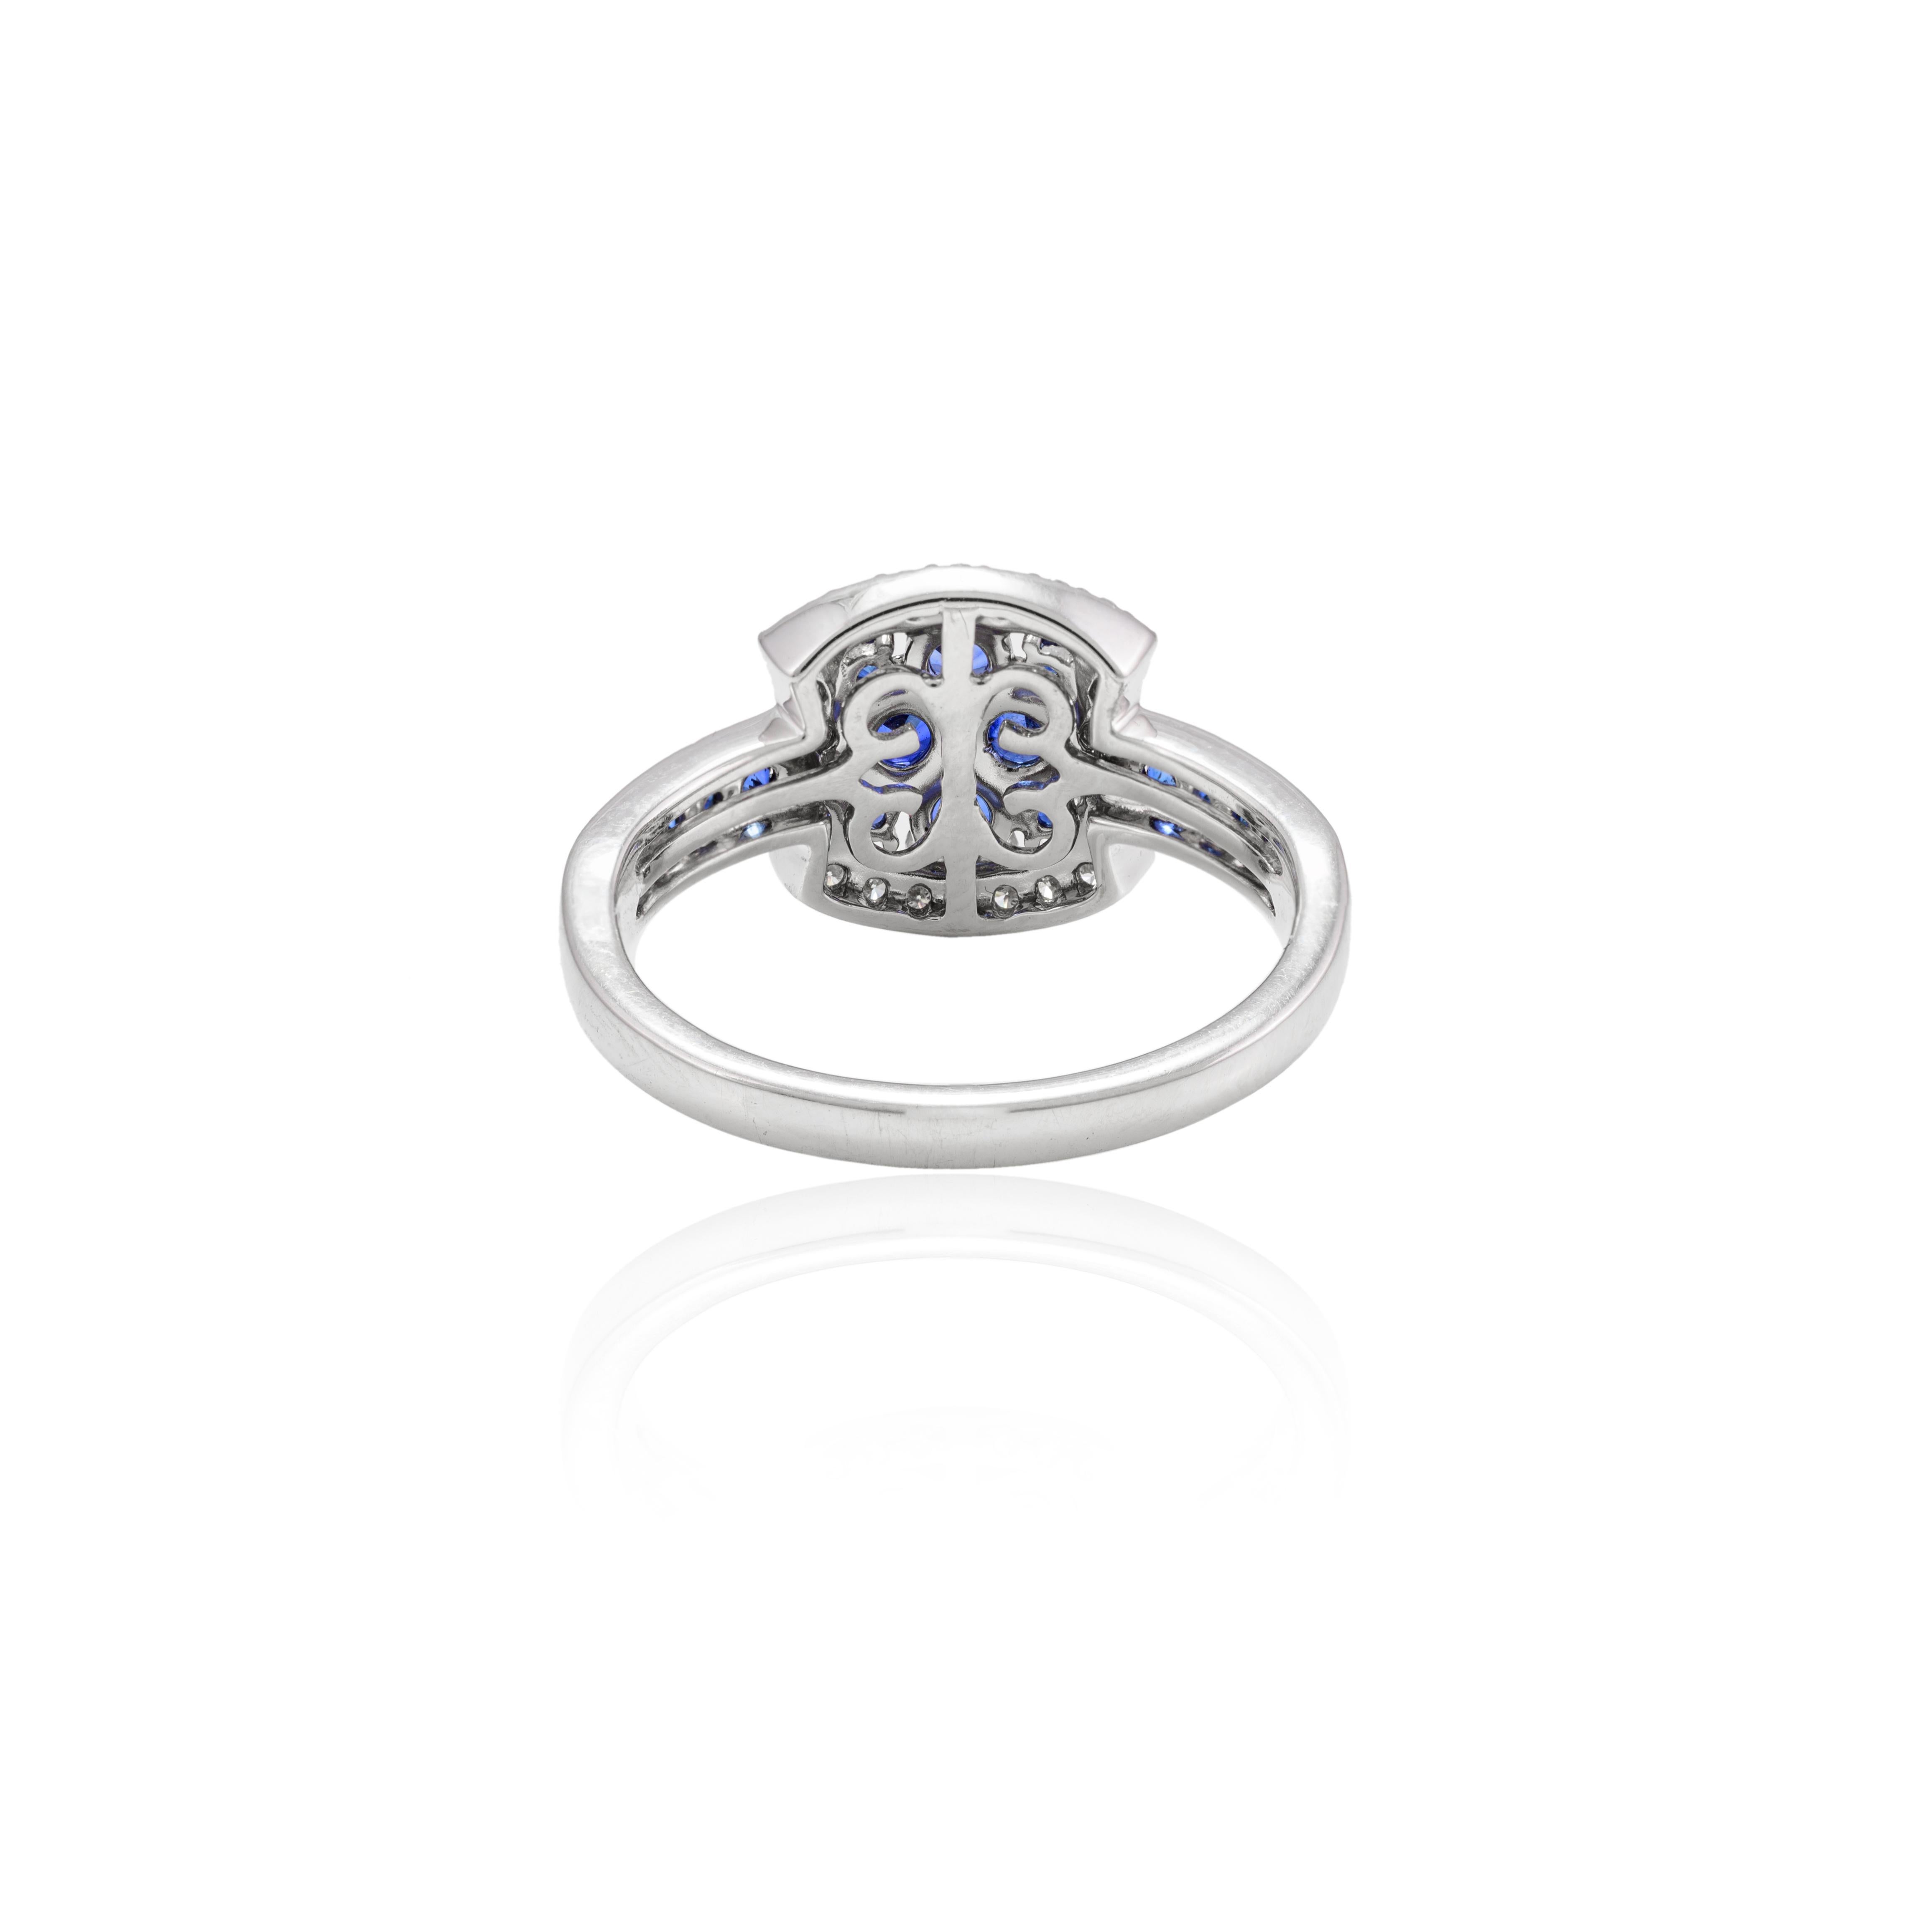 For Sale:  Antique Blue Sapphire and Diamond Engagement Ring in 14k Solid White Gold 6